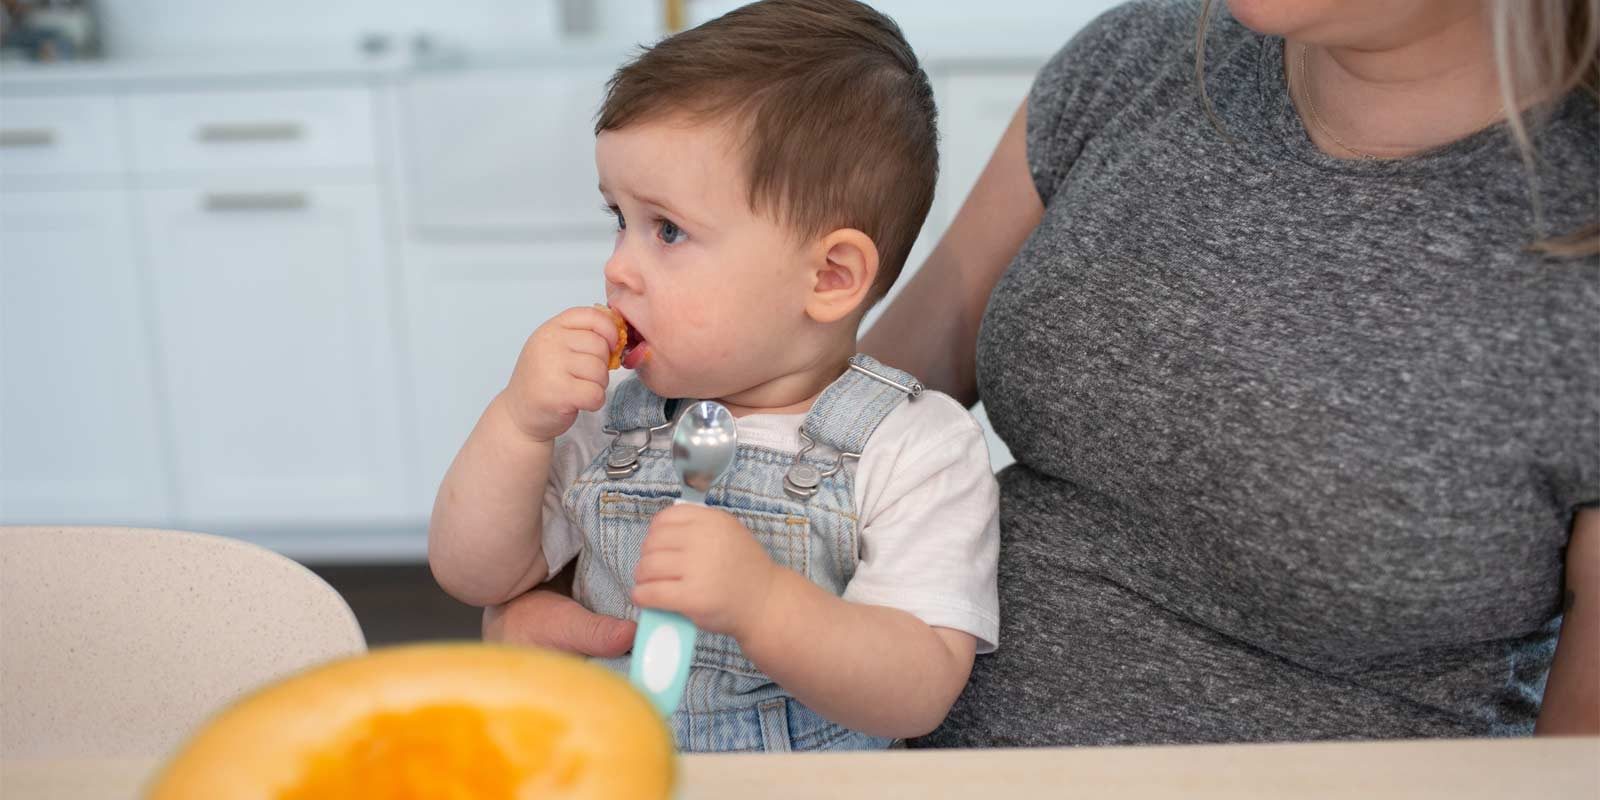 Toddler eating cantaloupe with teal soft-grip spoon